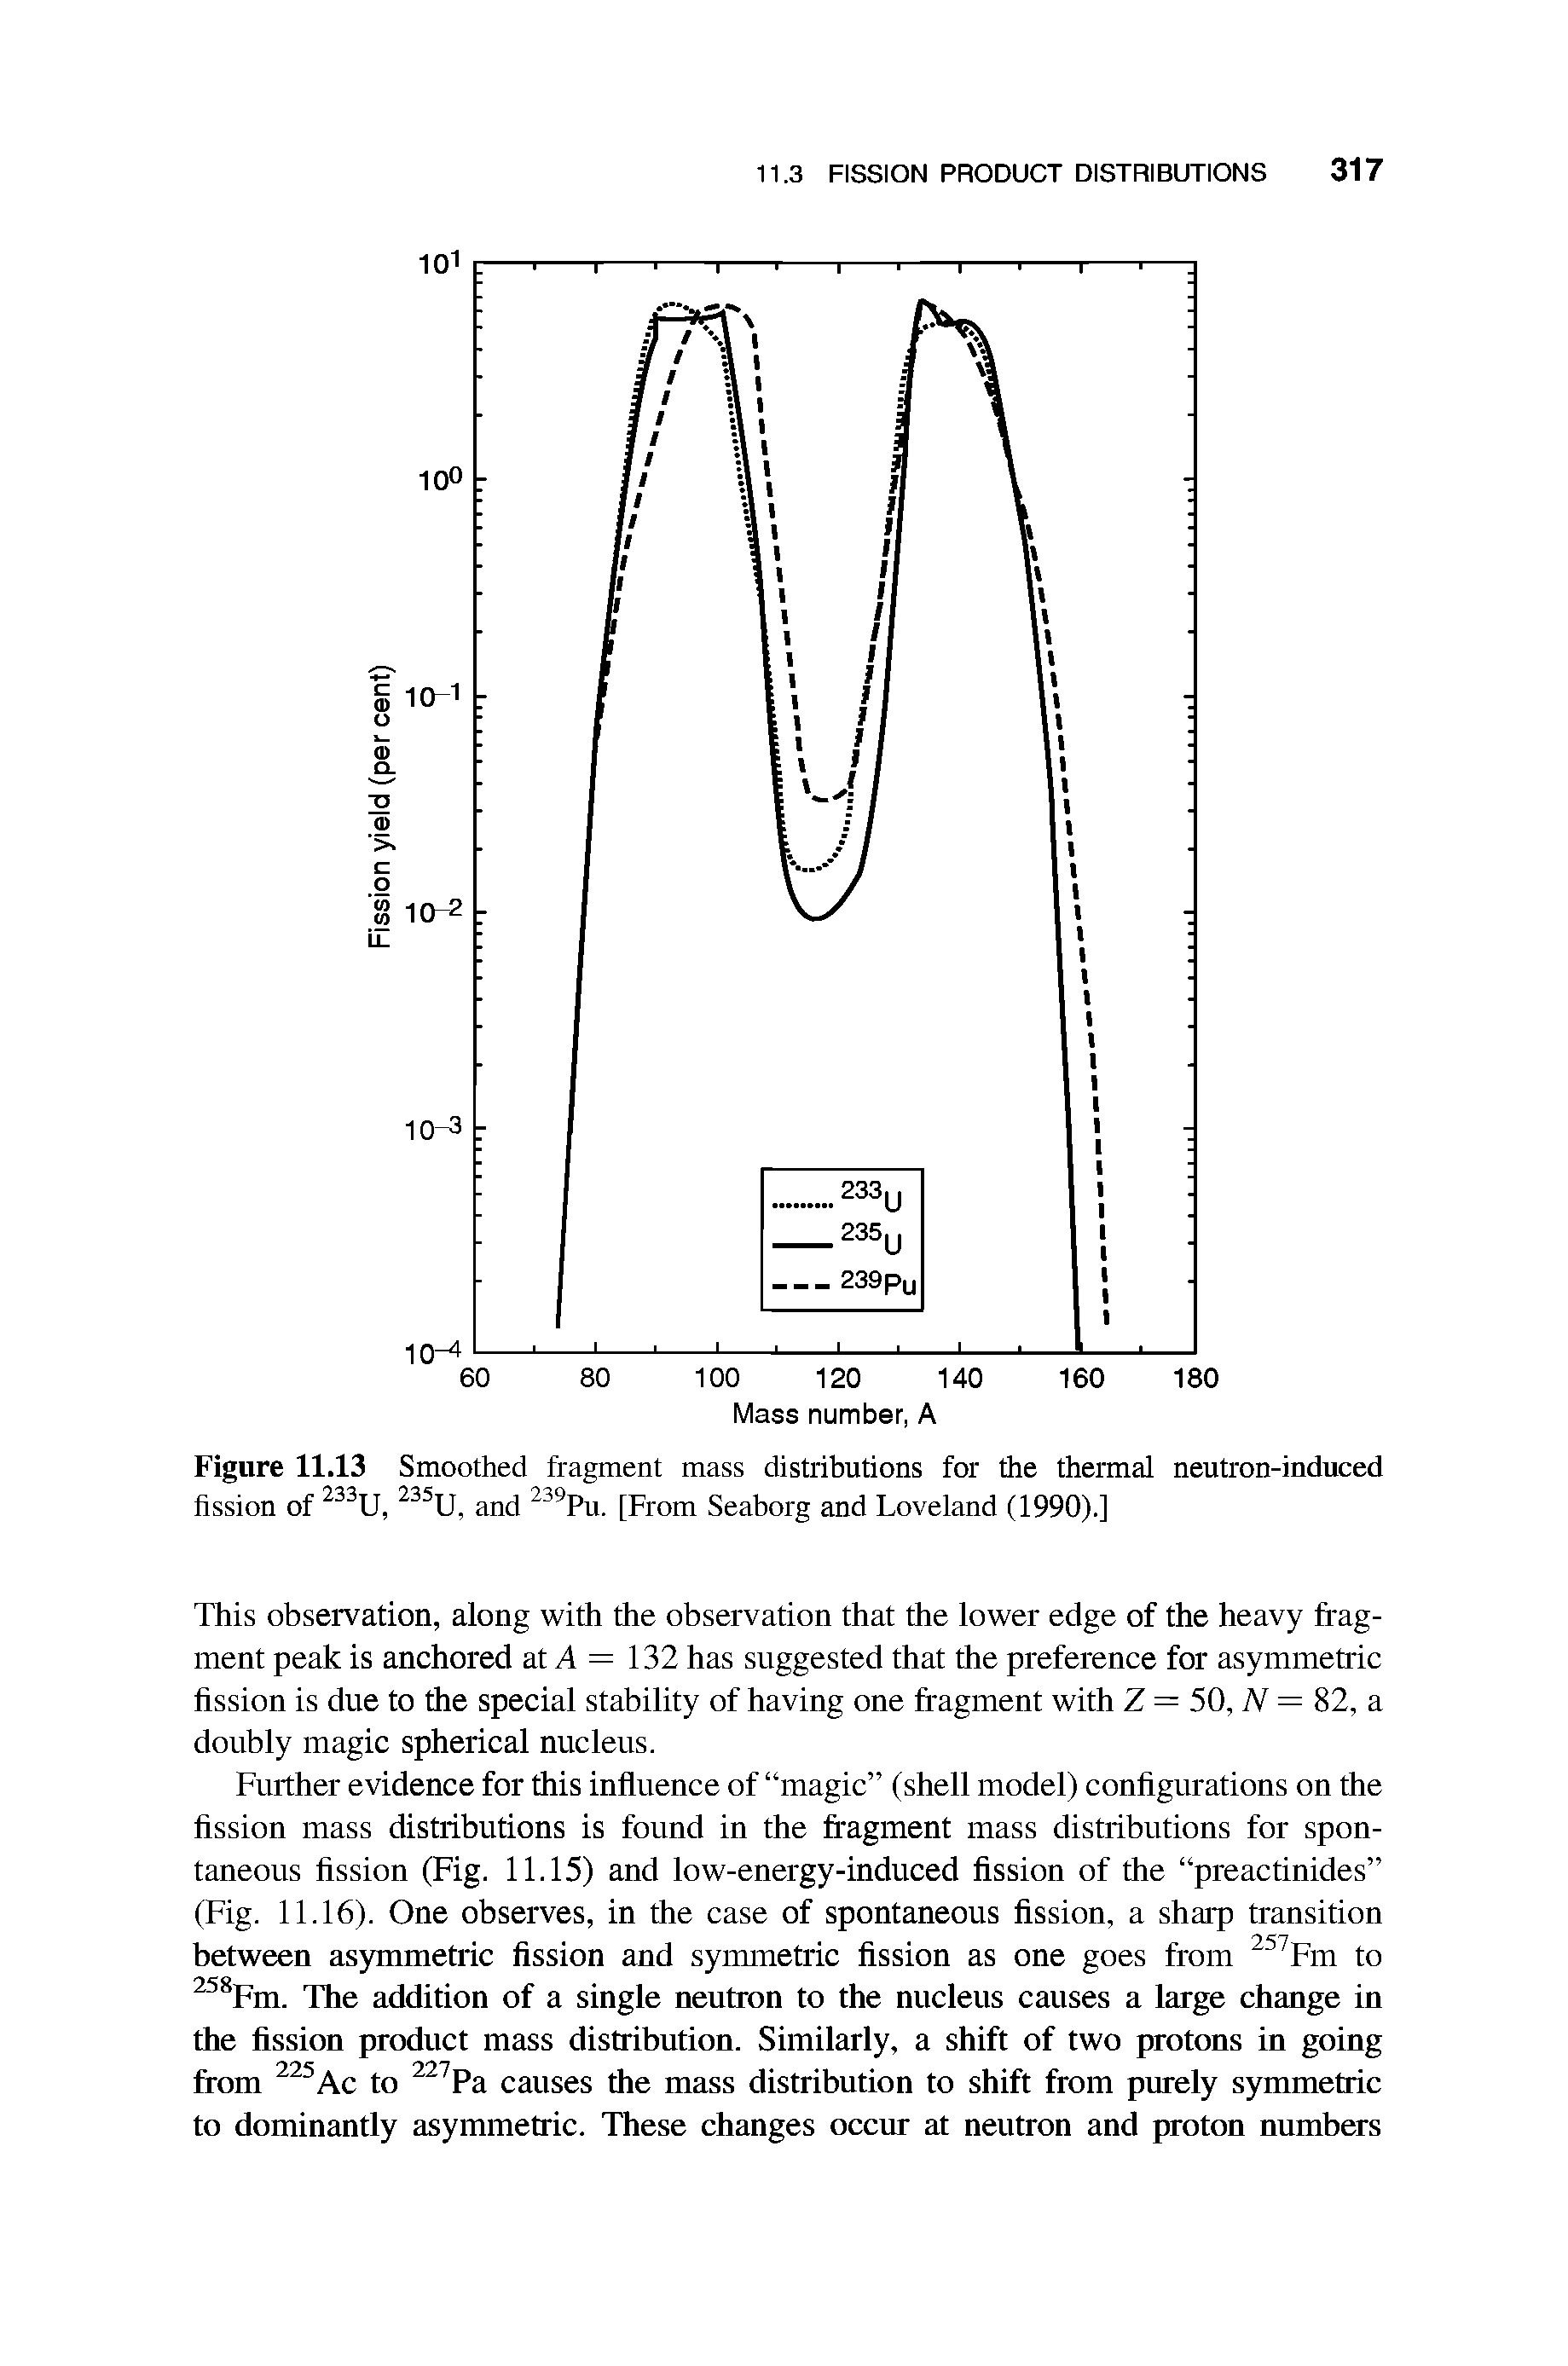 Figure 11.13 Smoothed fragment mass distributions for the thermal neutron-induced fission of 233U, 235U, and 239Pu. [From Seaborg and Loveland (1990).]...